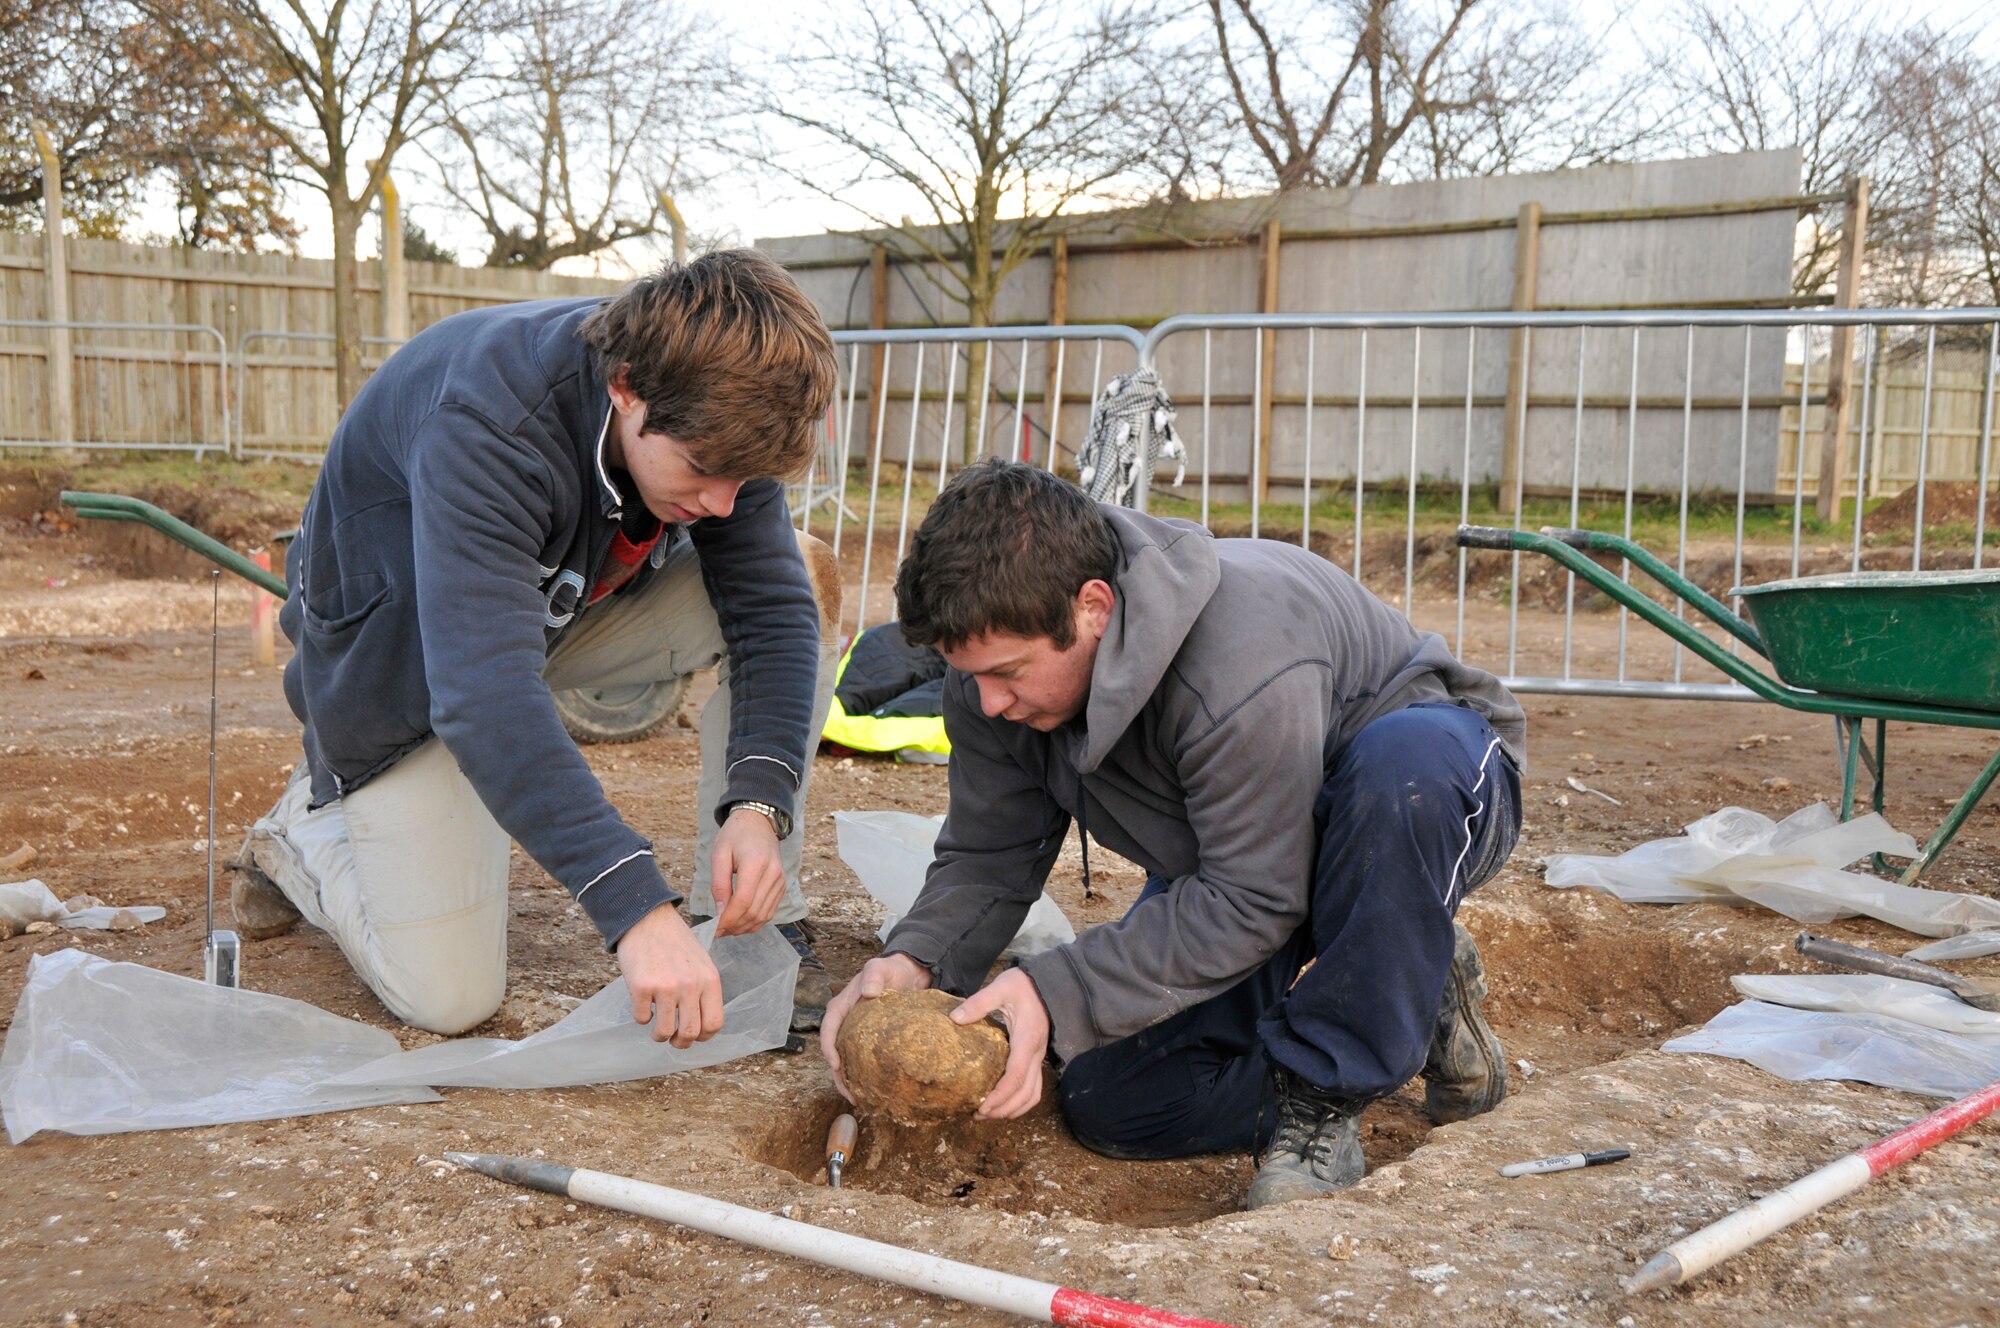 Edman Frieser, a junior site assistant with the Suffolk County Council Archaeological Service, hold open a plastic bag, while John Sims, an archaeologist with the service, carefully moves the skull into a bag Nov 24 at RAF Lakenheath, England. The skull and other skeletal remains will later be studied. (U.S. Air Force photo by Airman 1st Class Perry Aston)